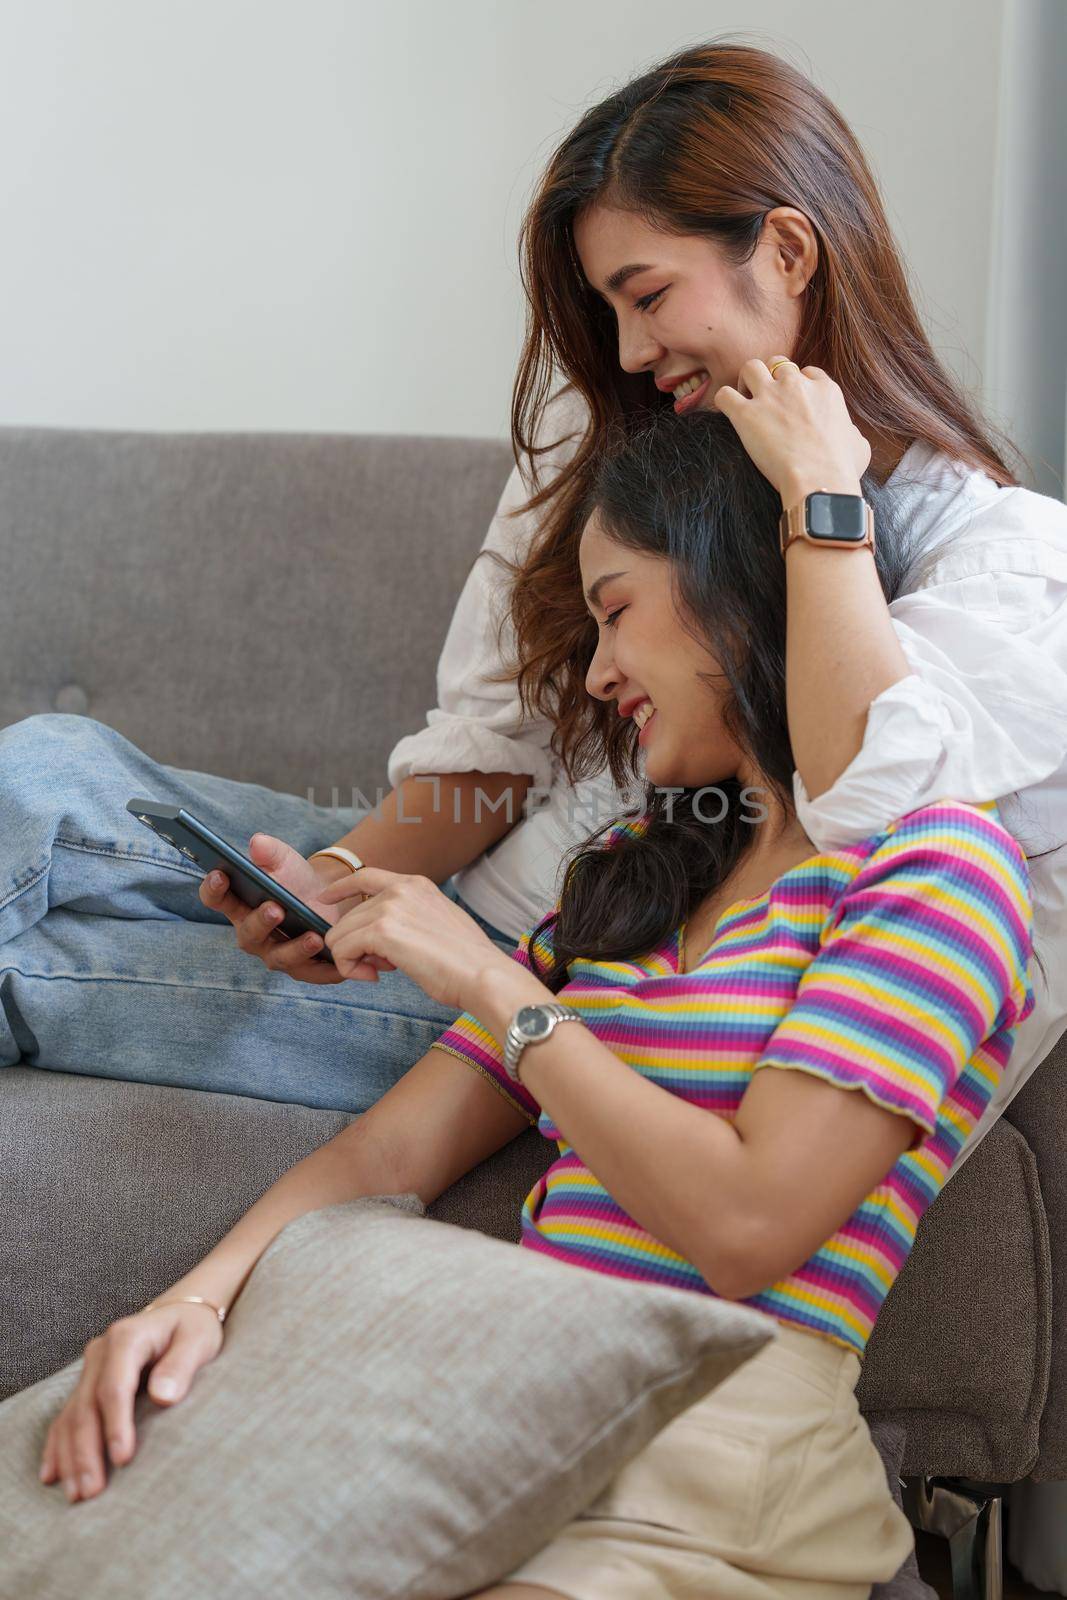 Young Asian Women LGBT lesbian couple love moments happiness at bedroom. LGBTQ or Gay and pride concpet. by itchaznong